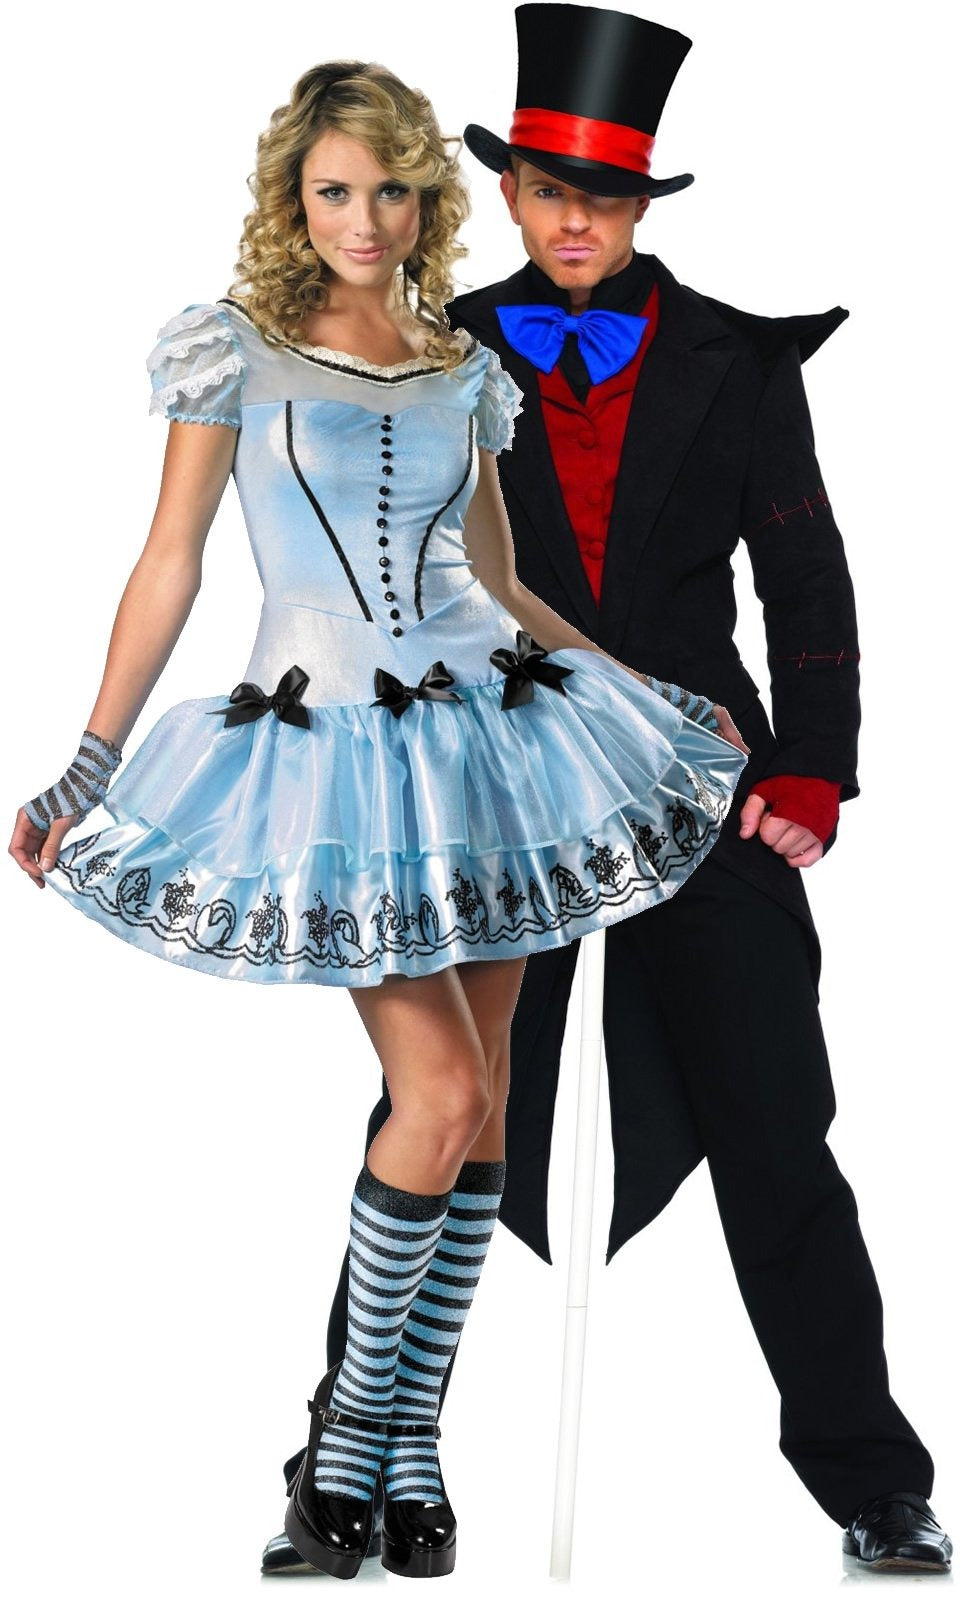 Short Alice dress with black bows, gloves and socks, next to Mad Hatter